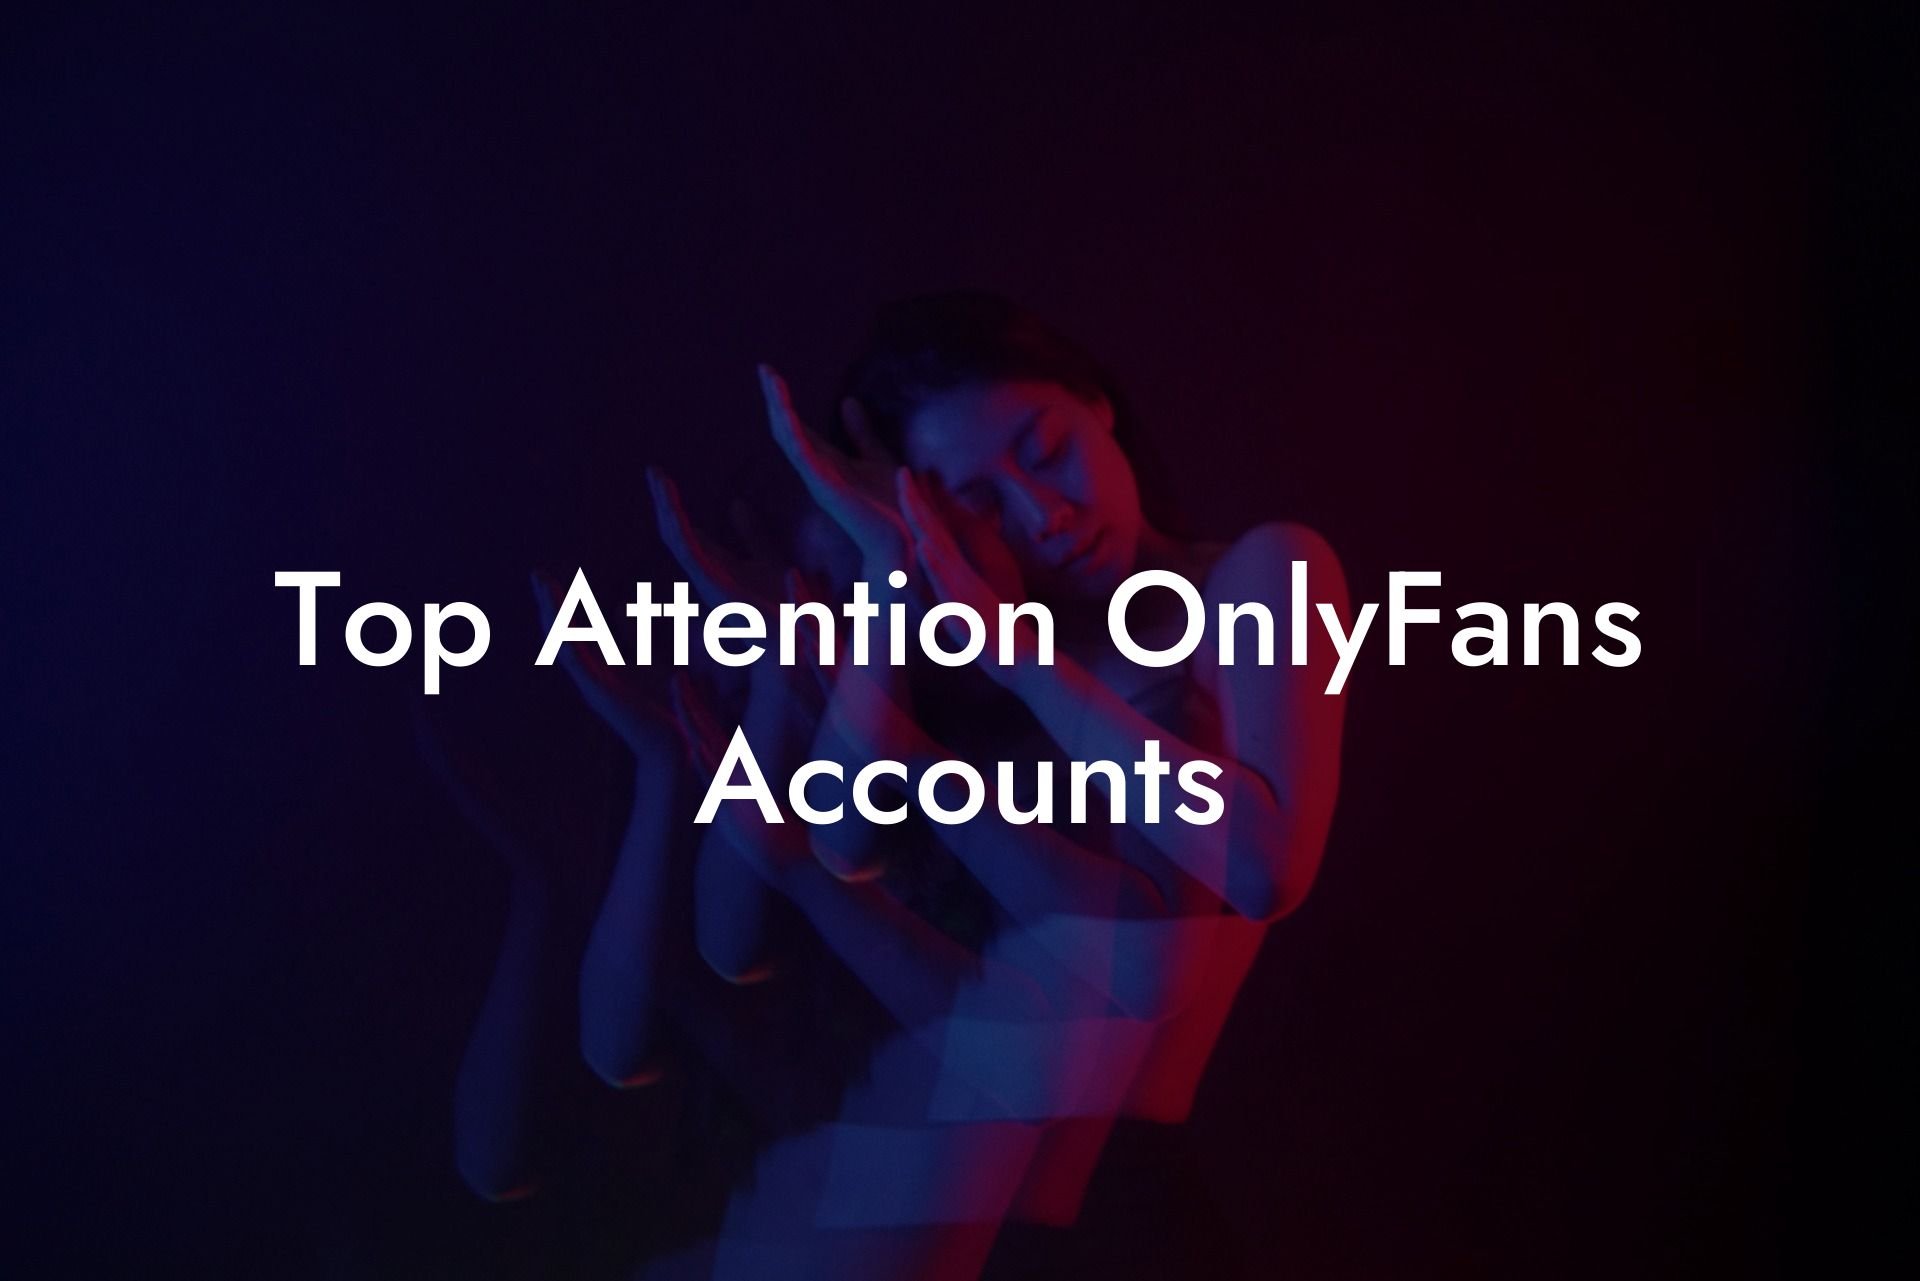 Top Attention OnlyFans Accounts